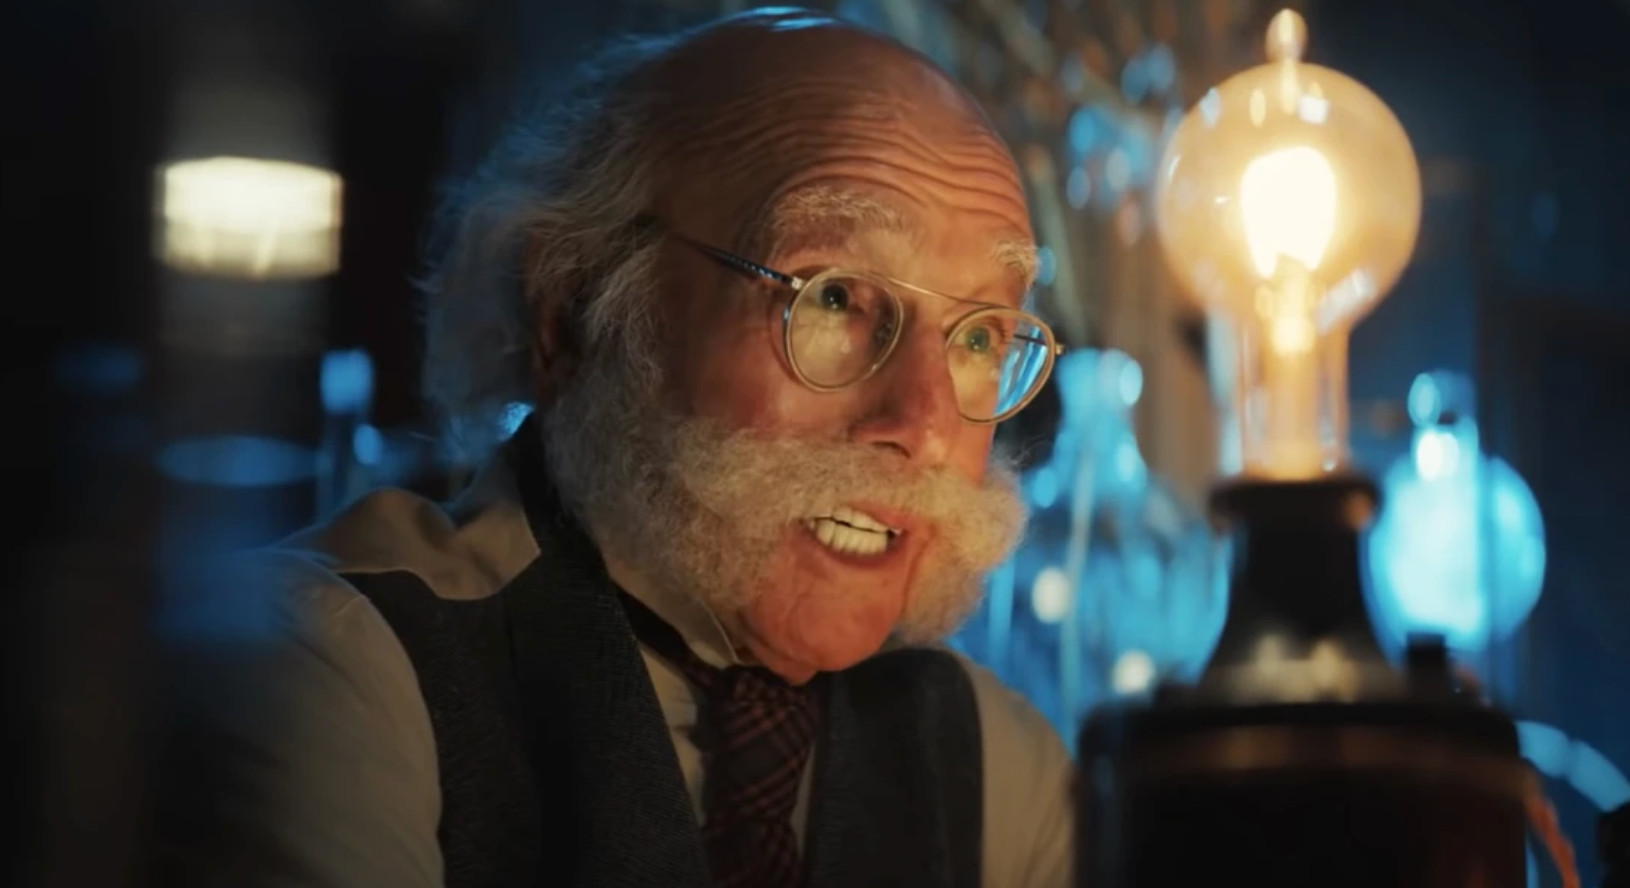 Larry David appeared in a Super Bowl advert promoting crypto exchange FTX